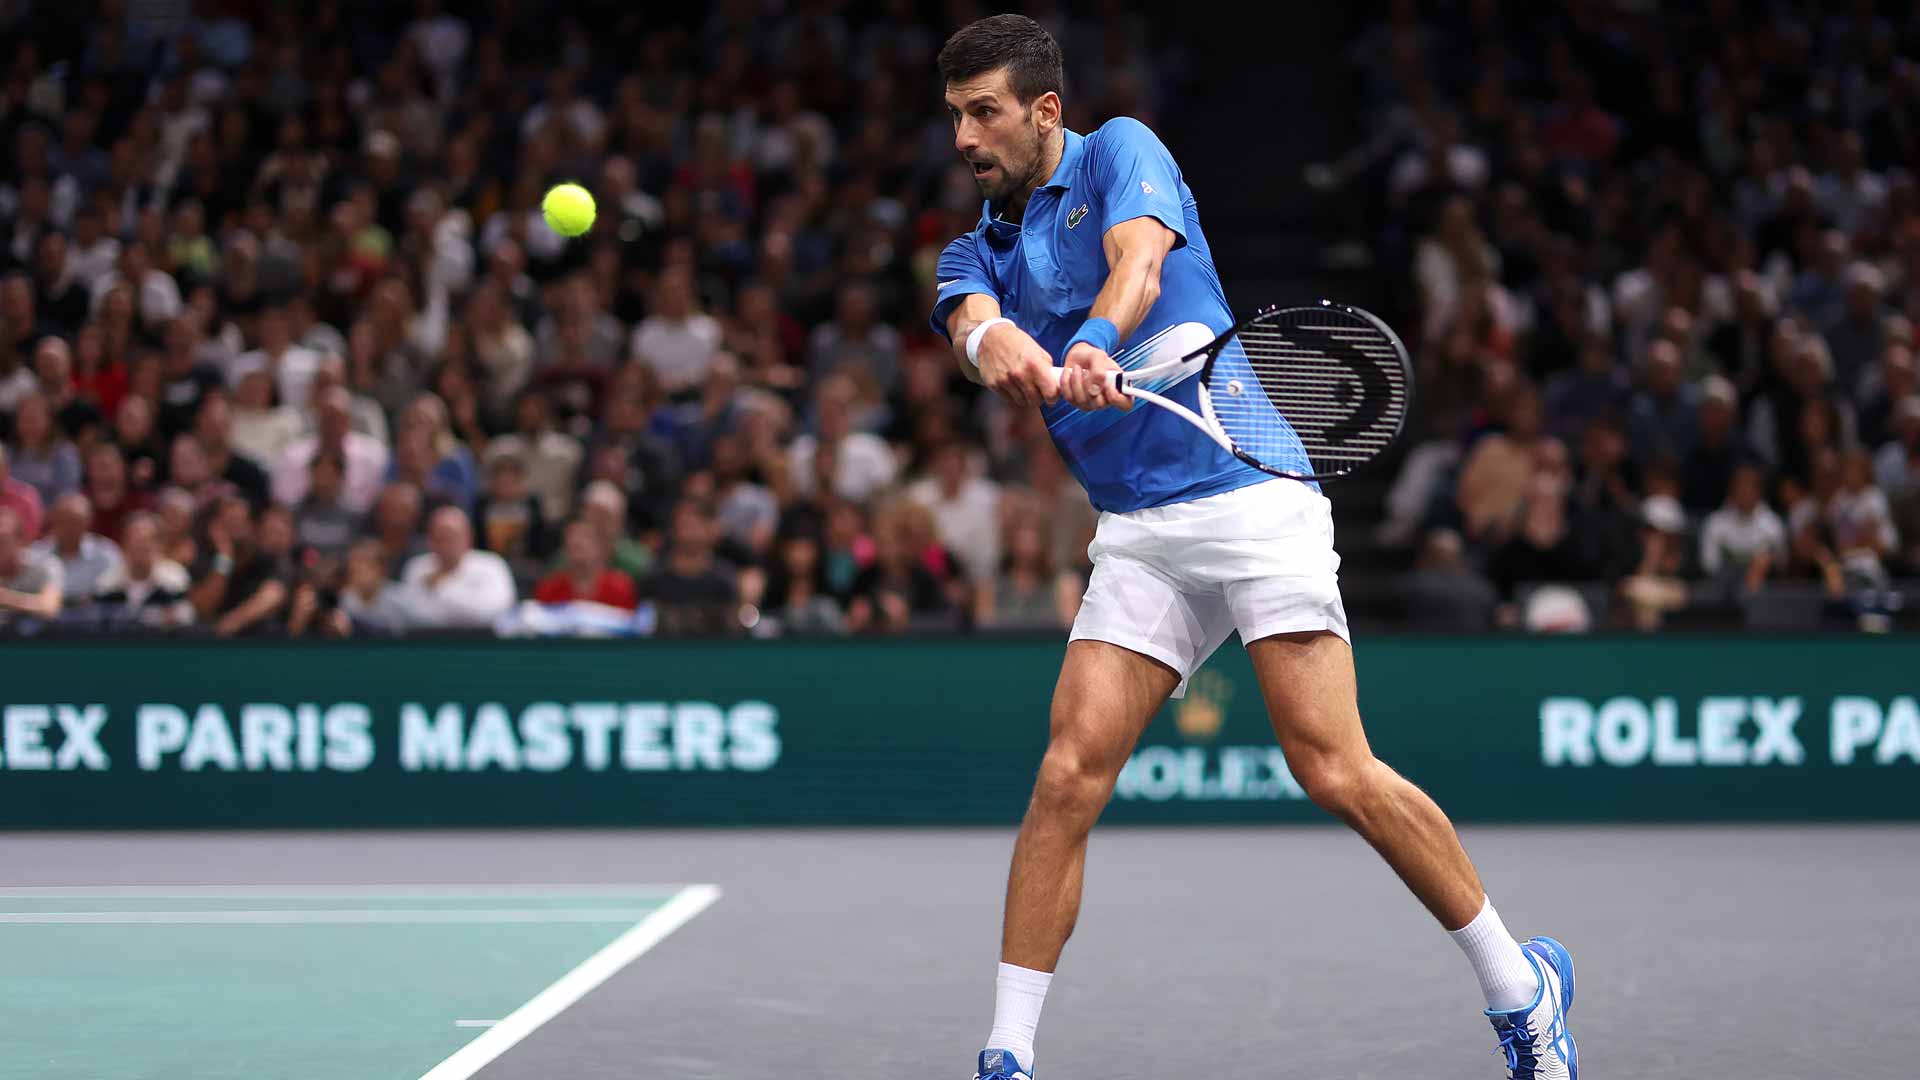 Novak Djokovic earns a hard-fought victory against Stefanos Tsitsipas at the 2022 ATP Masters 1000 event in Paris.